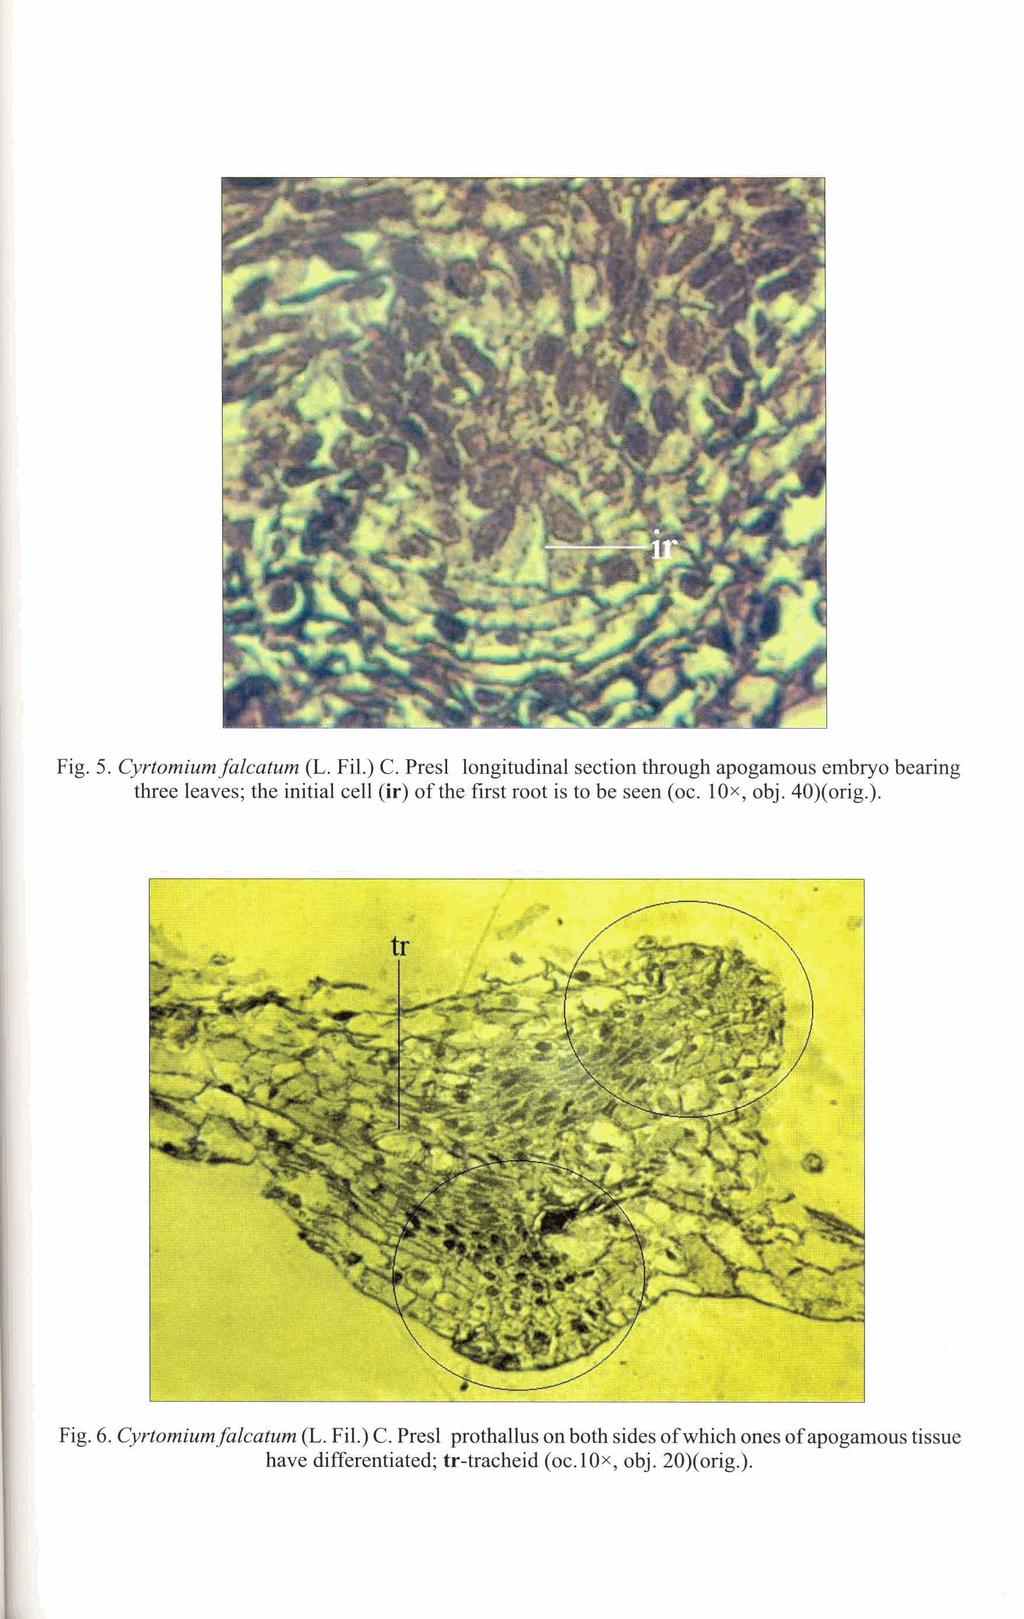 Fig. 5. Cyrtomium falcatum (L. Fil.) C. Presl longitudinal section through apogamous embryo bearing three leaves; the initial cell (ir) of the first root is to be seen (oc.